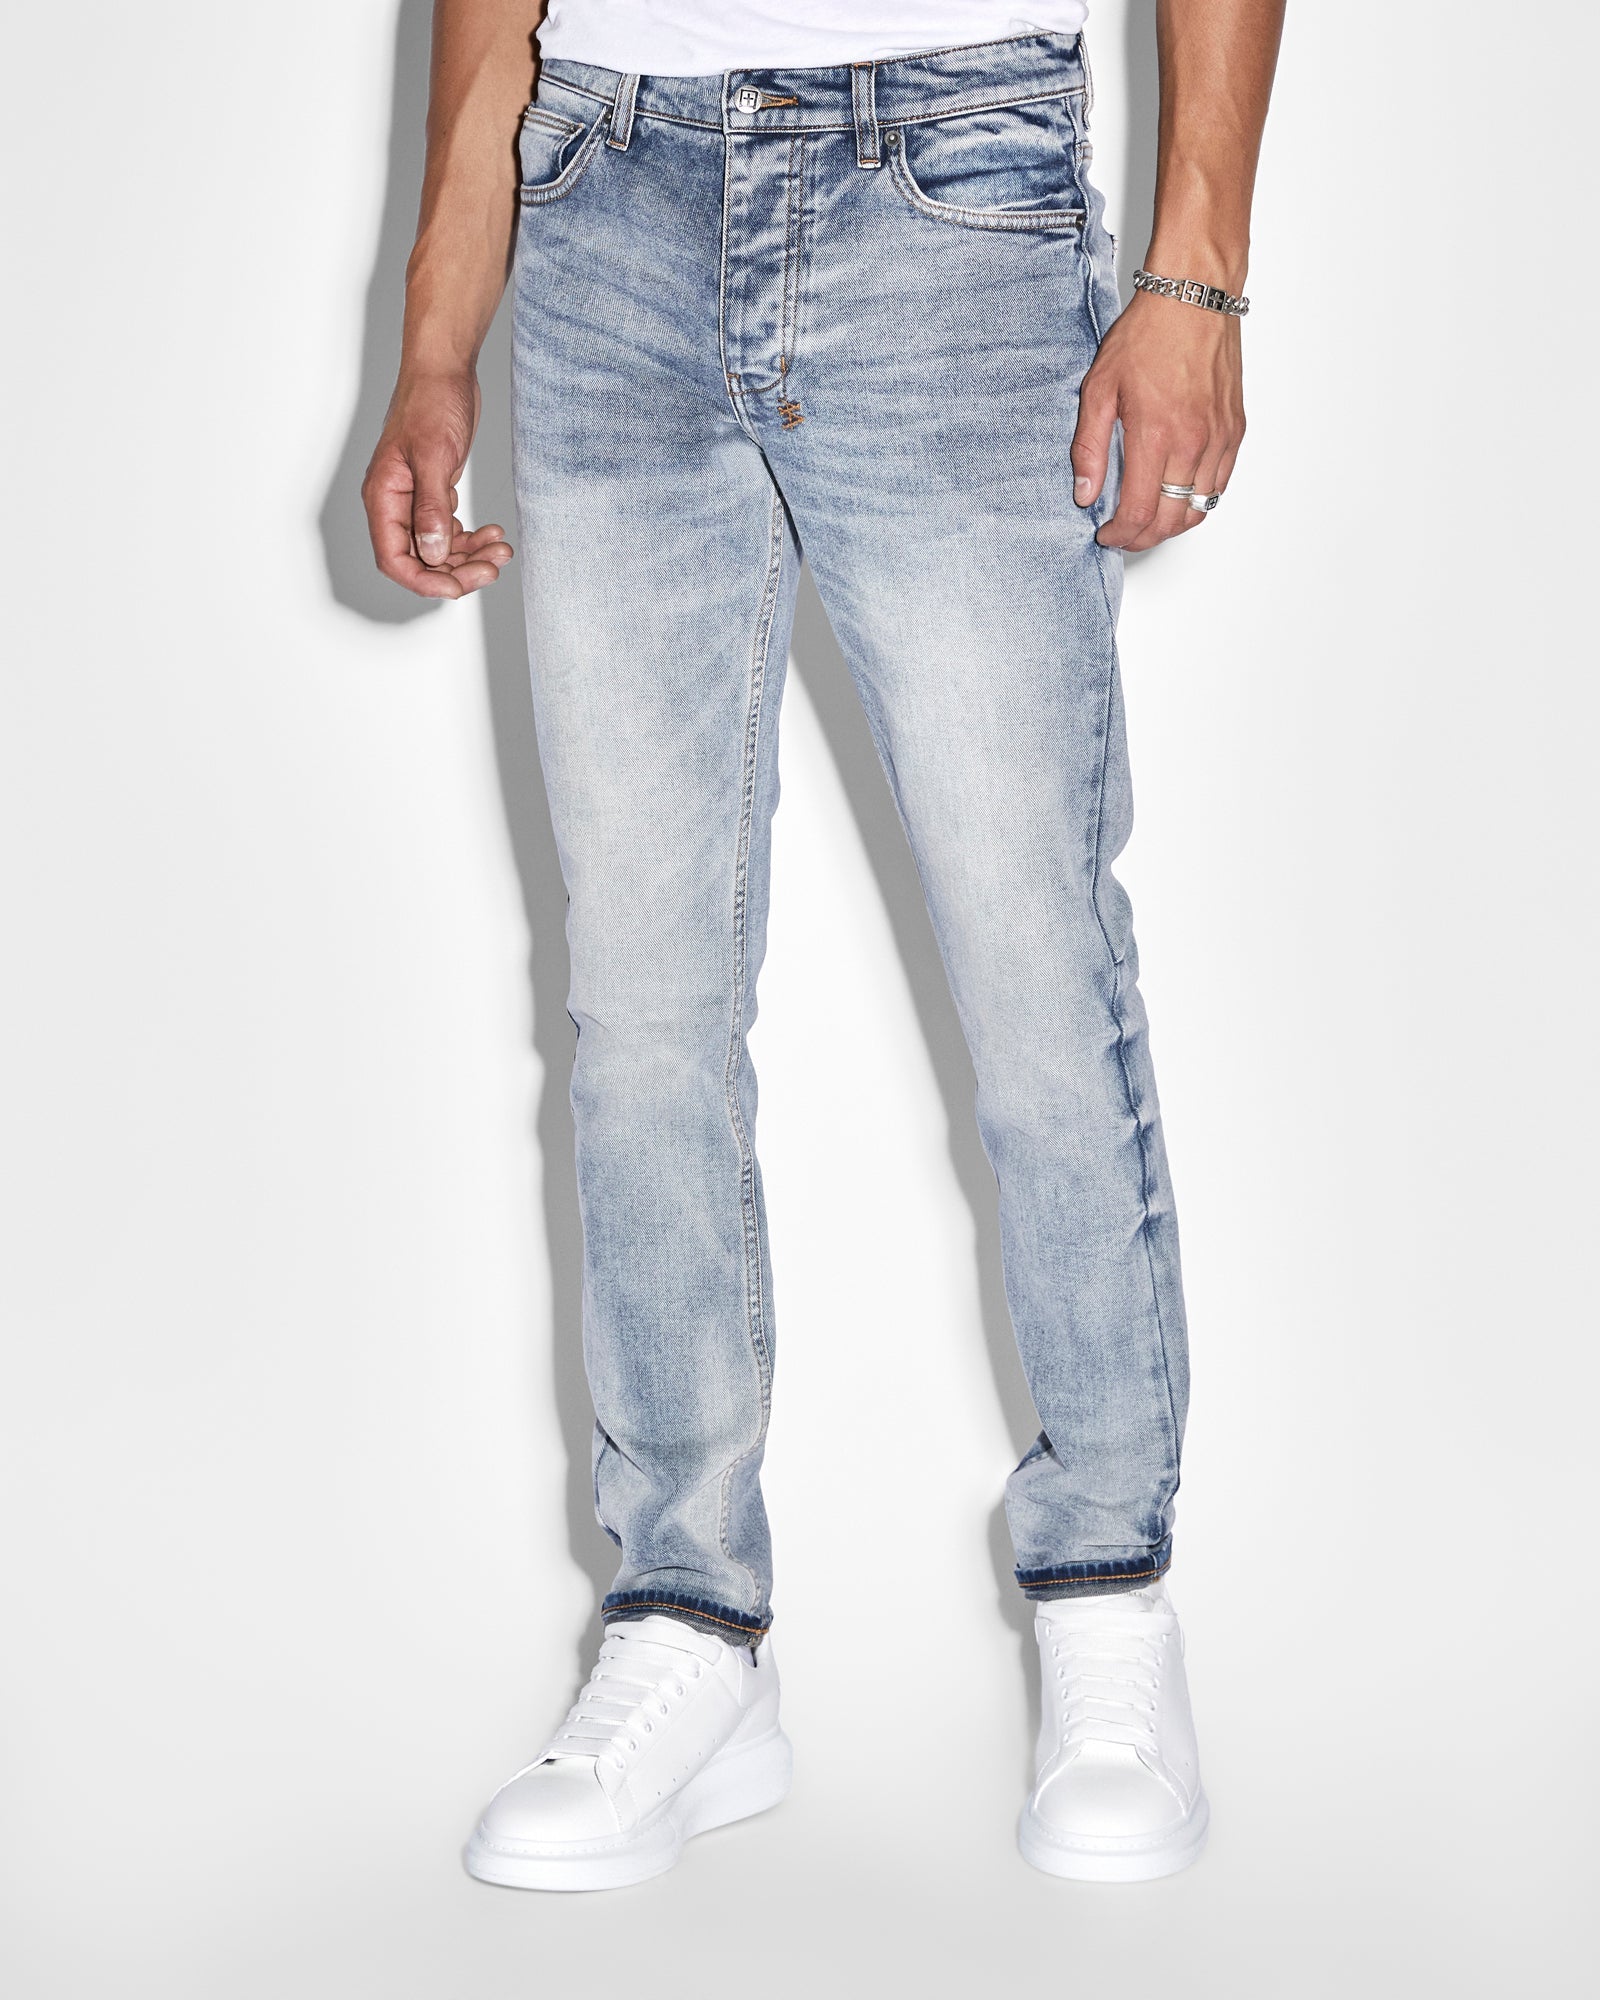 Buy Chitch Pure Dynamite, Men's Tapered Jeans